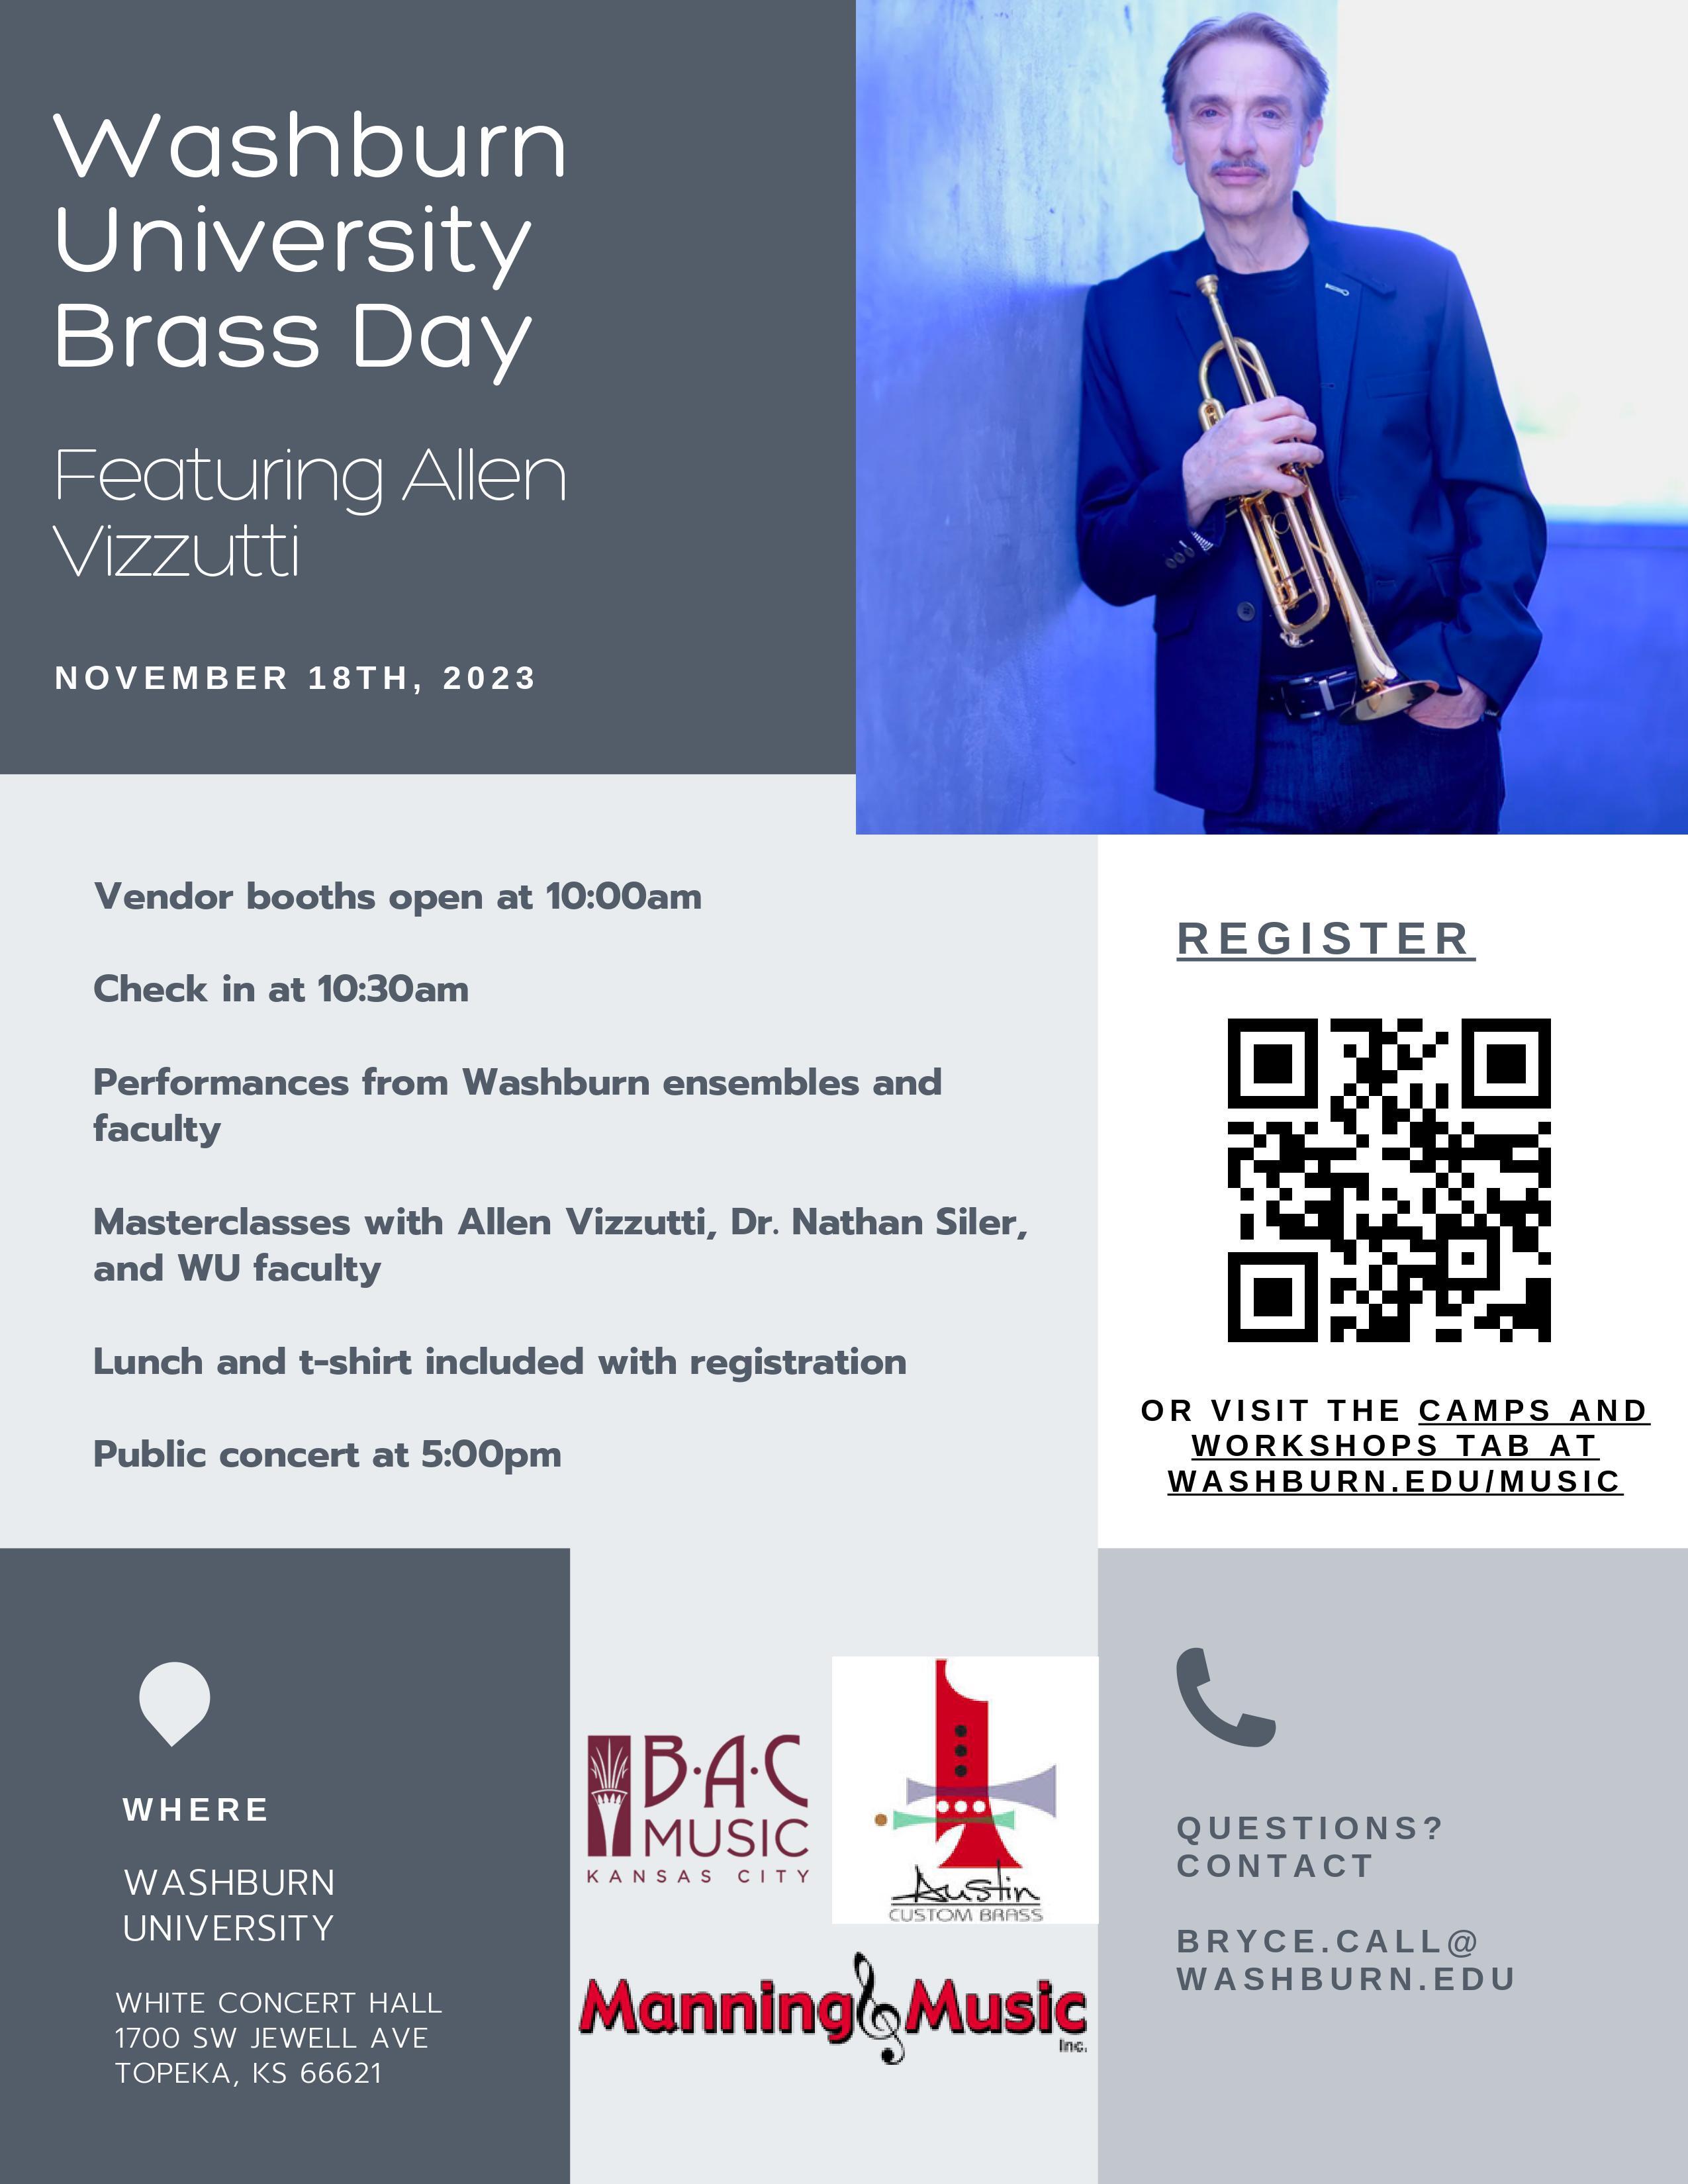 Click to get more info on Washburn University's Brass Day on the 18th!